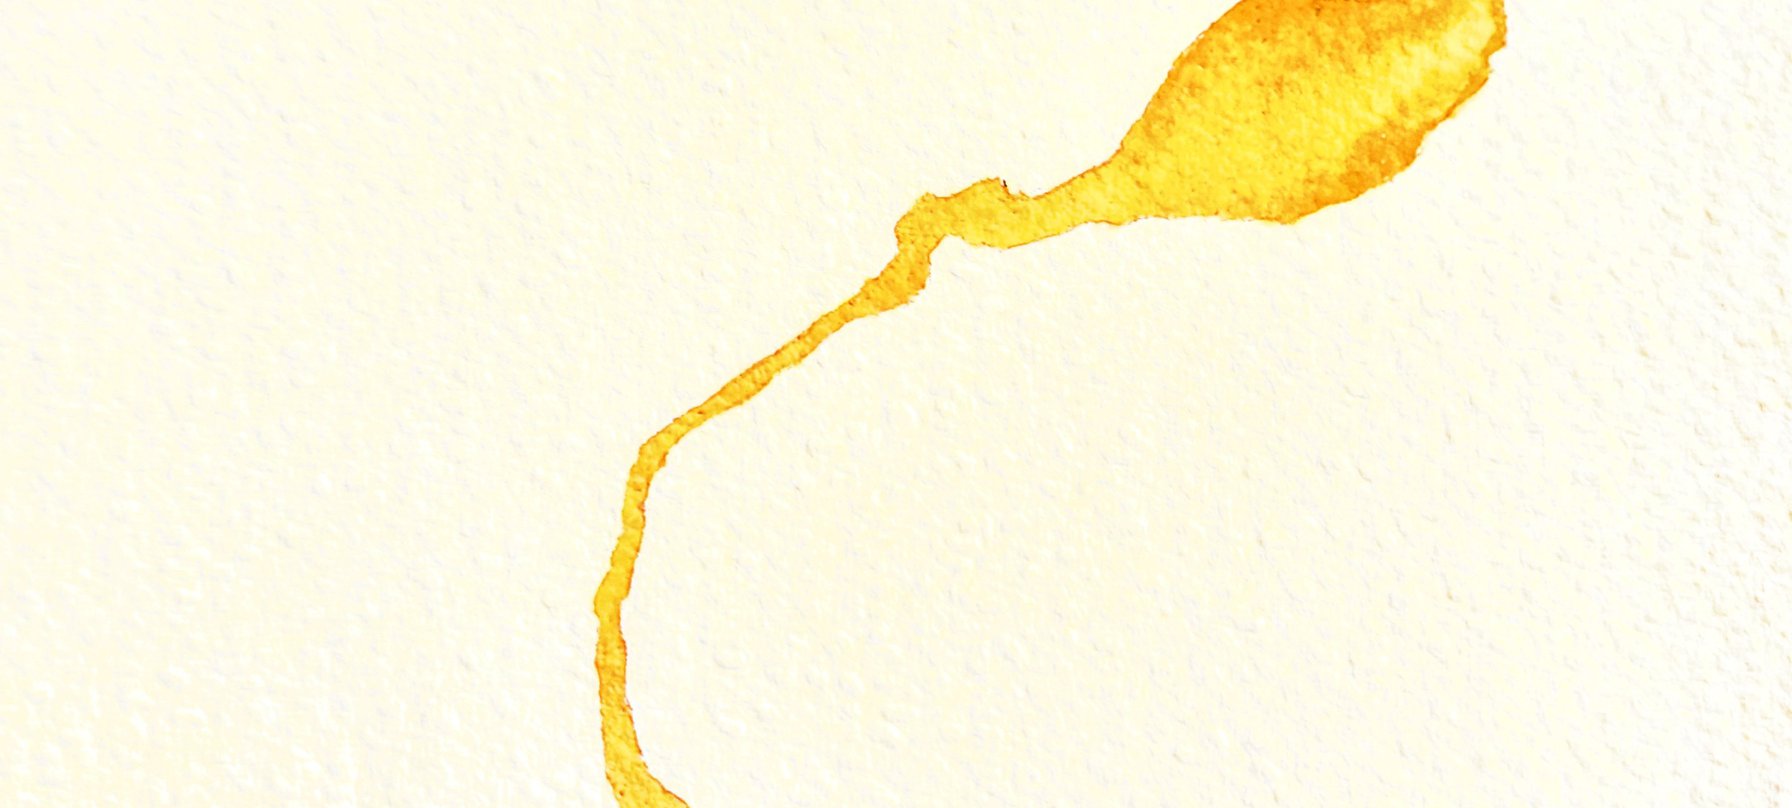 A line of yellow watercolour paint across a page, credit Priscilla Beck.